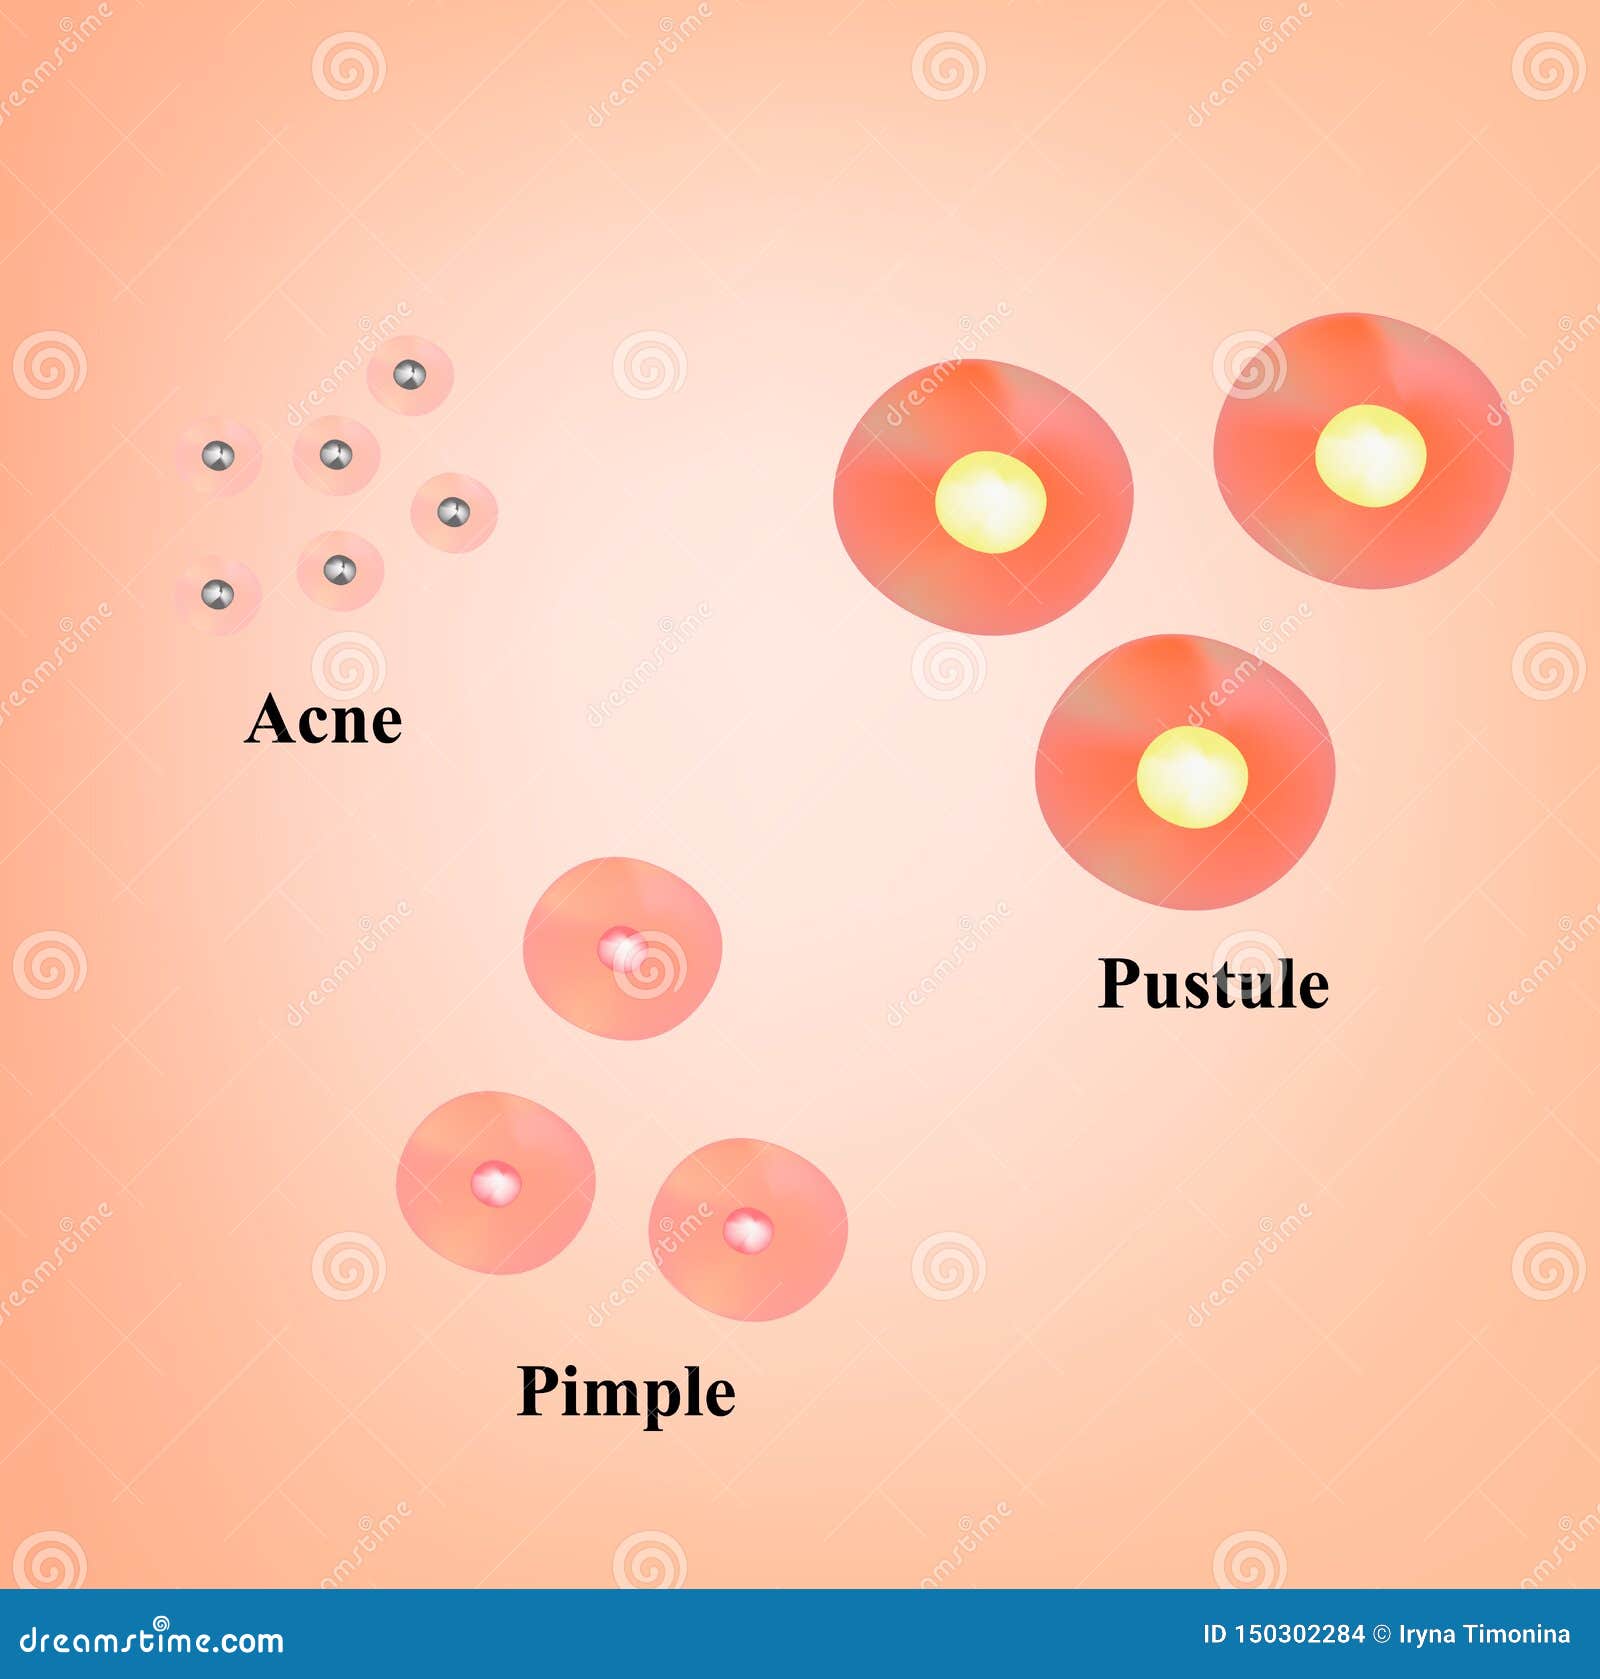 types of blackheads, pustule, acne. scarred skin after acne and acne. infographics.   on 